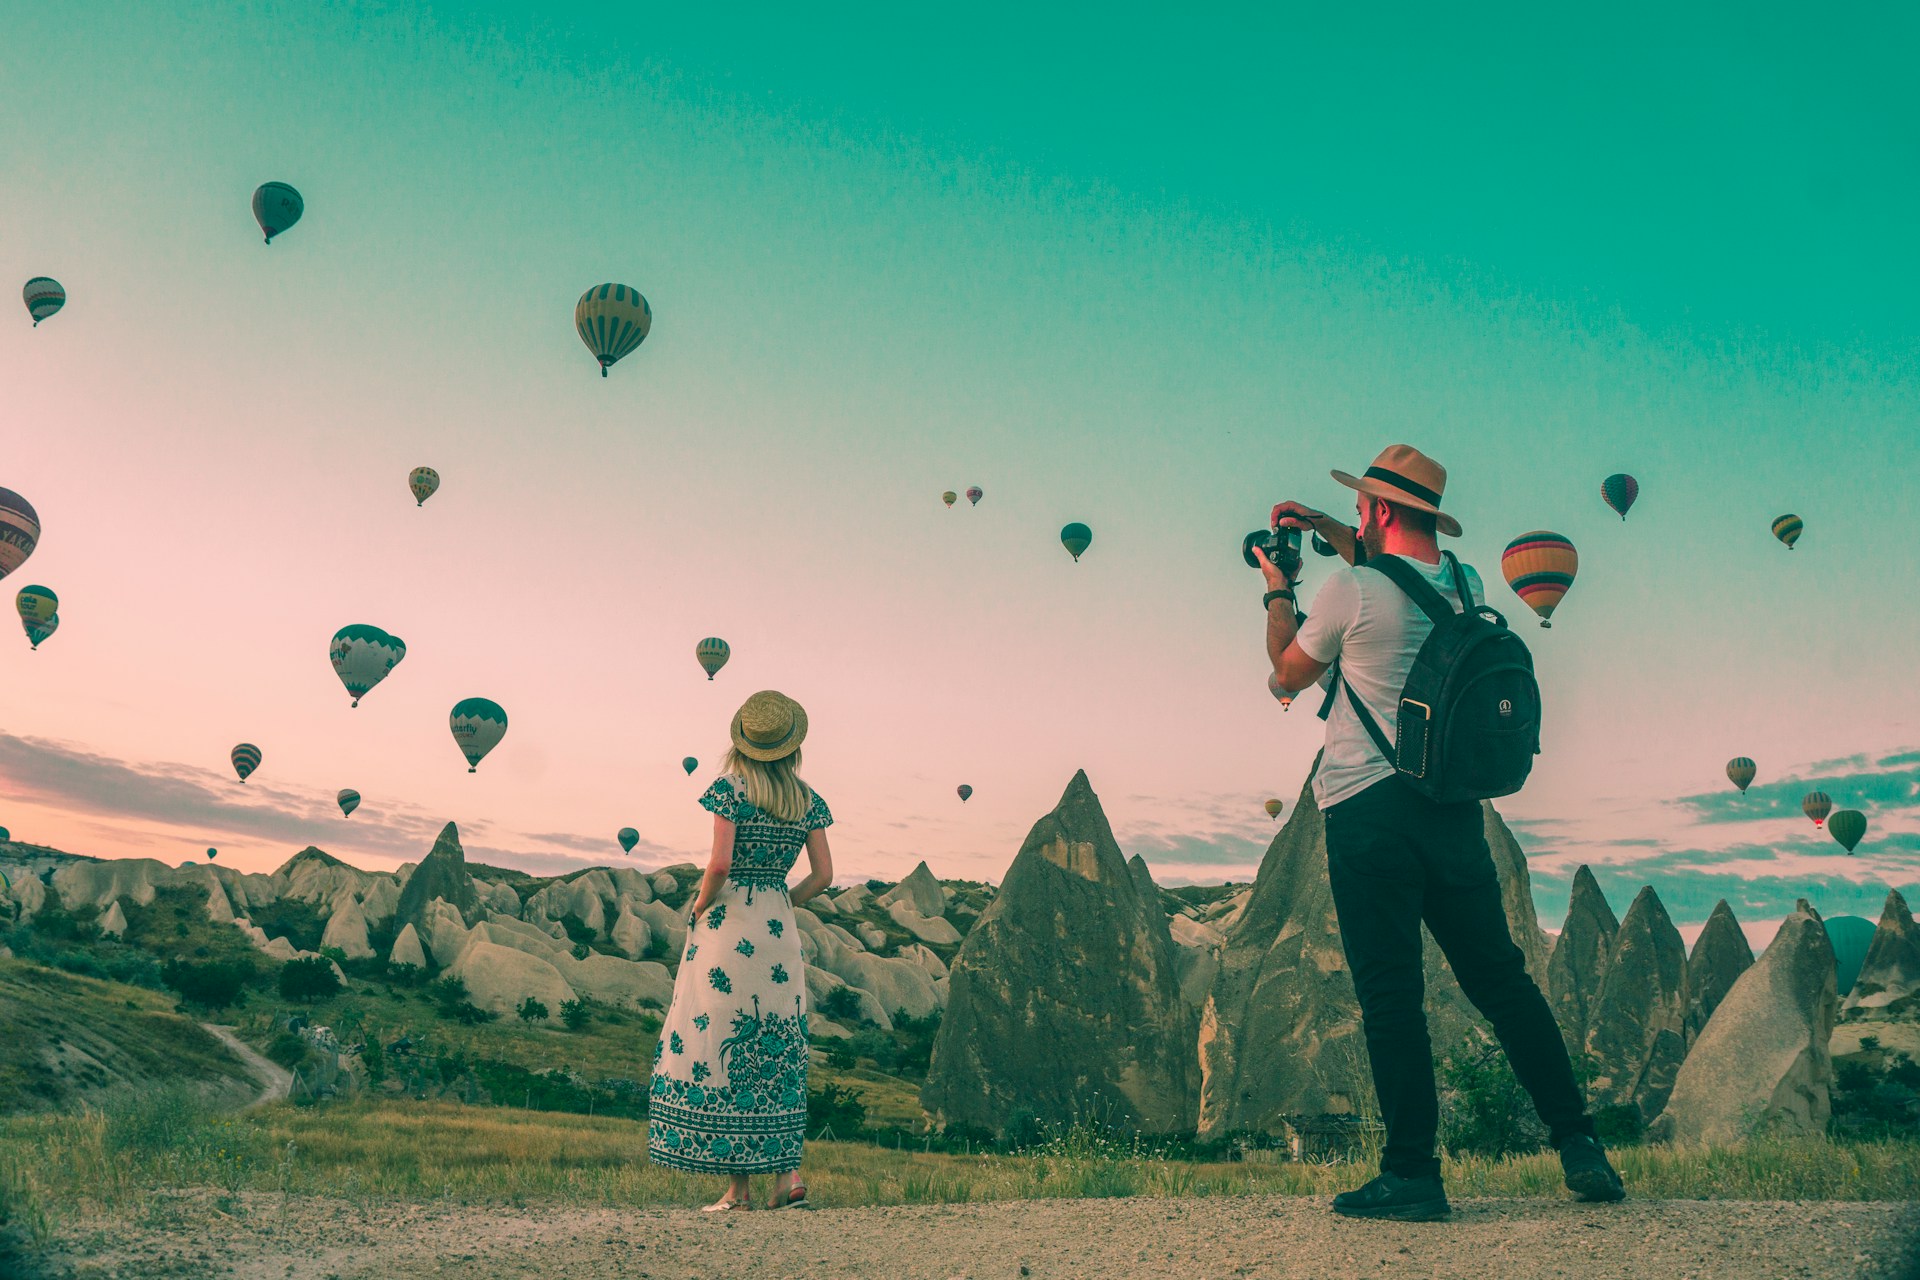 The chance to experience hot air balloons in Cappadocia, Turkey, is one of many compelling reasons to travel more (photo by Mesut Kaya)